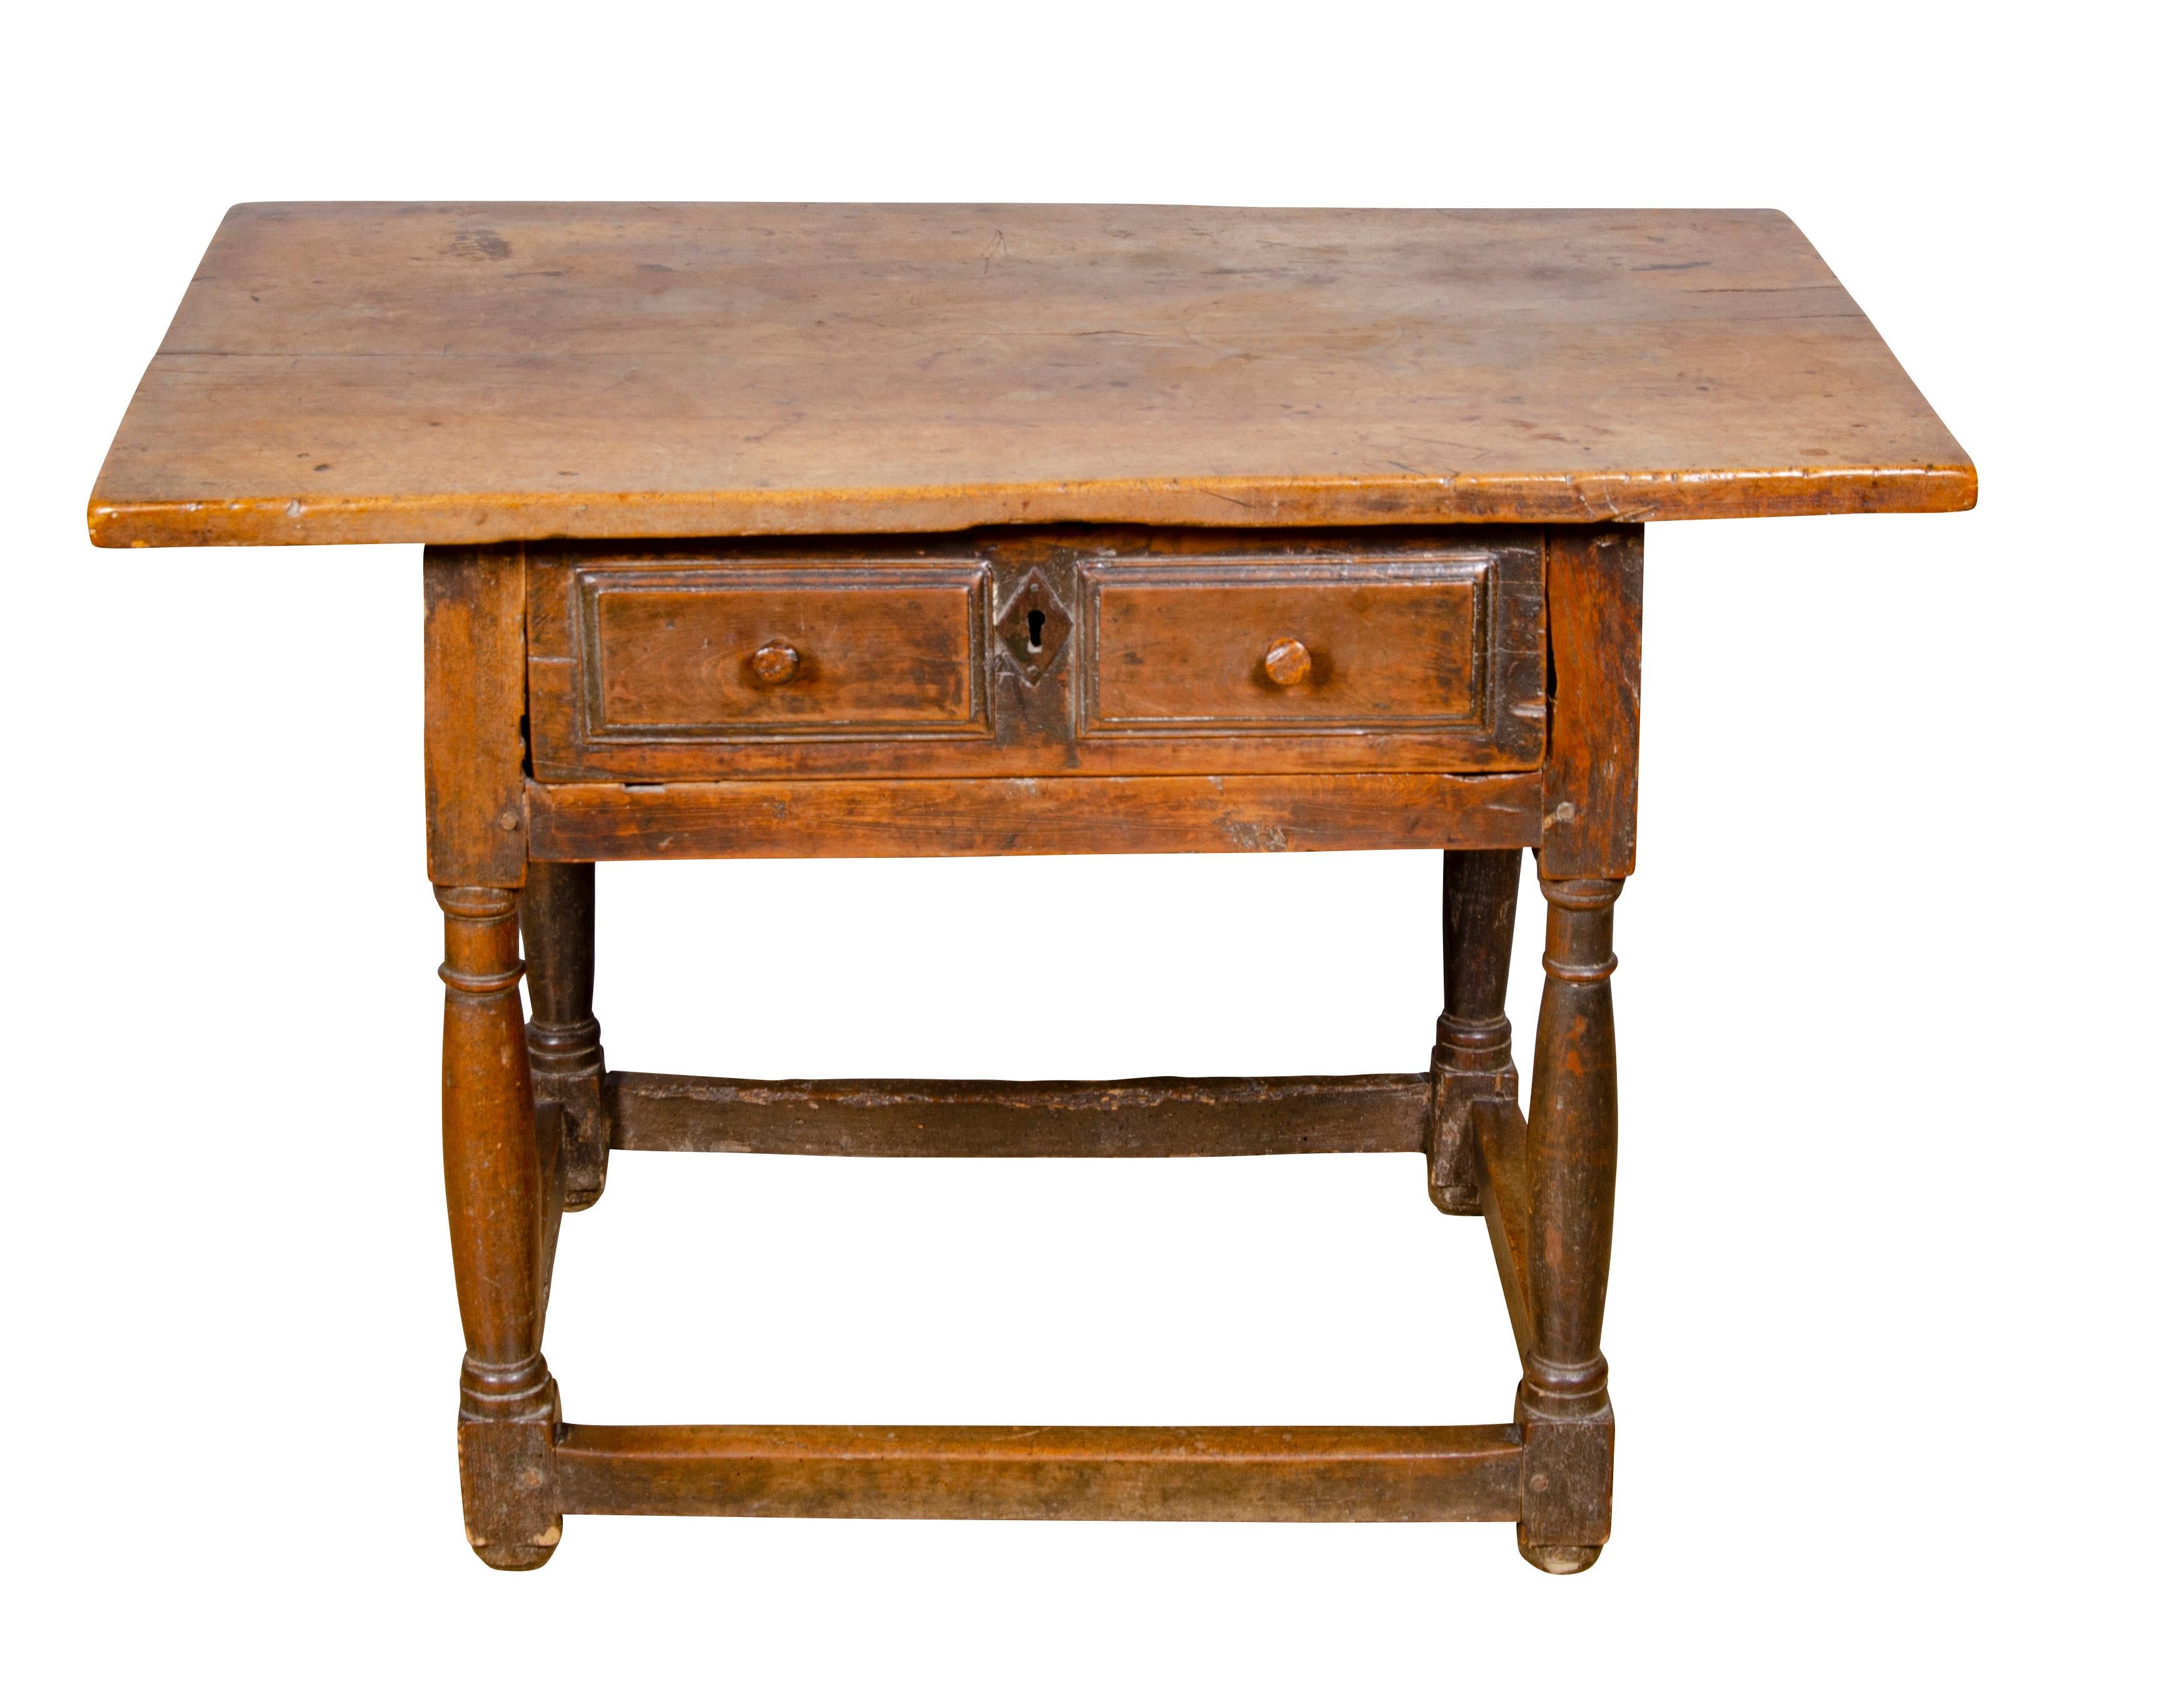 Rectangular top over a drawer with wrought iron handle, raised on turned legs with box stretchers.